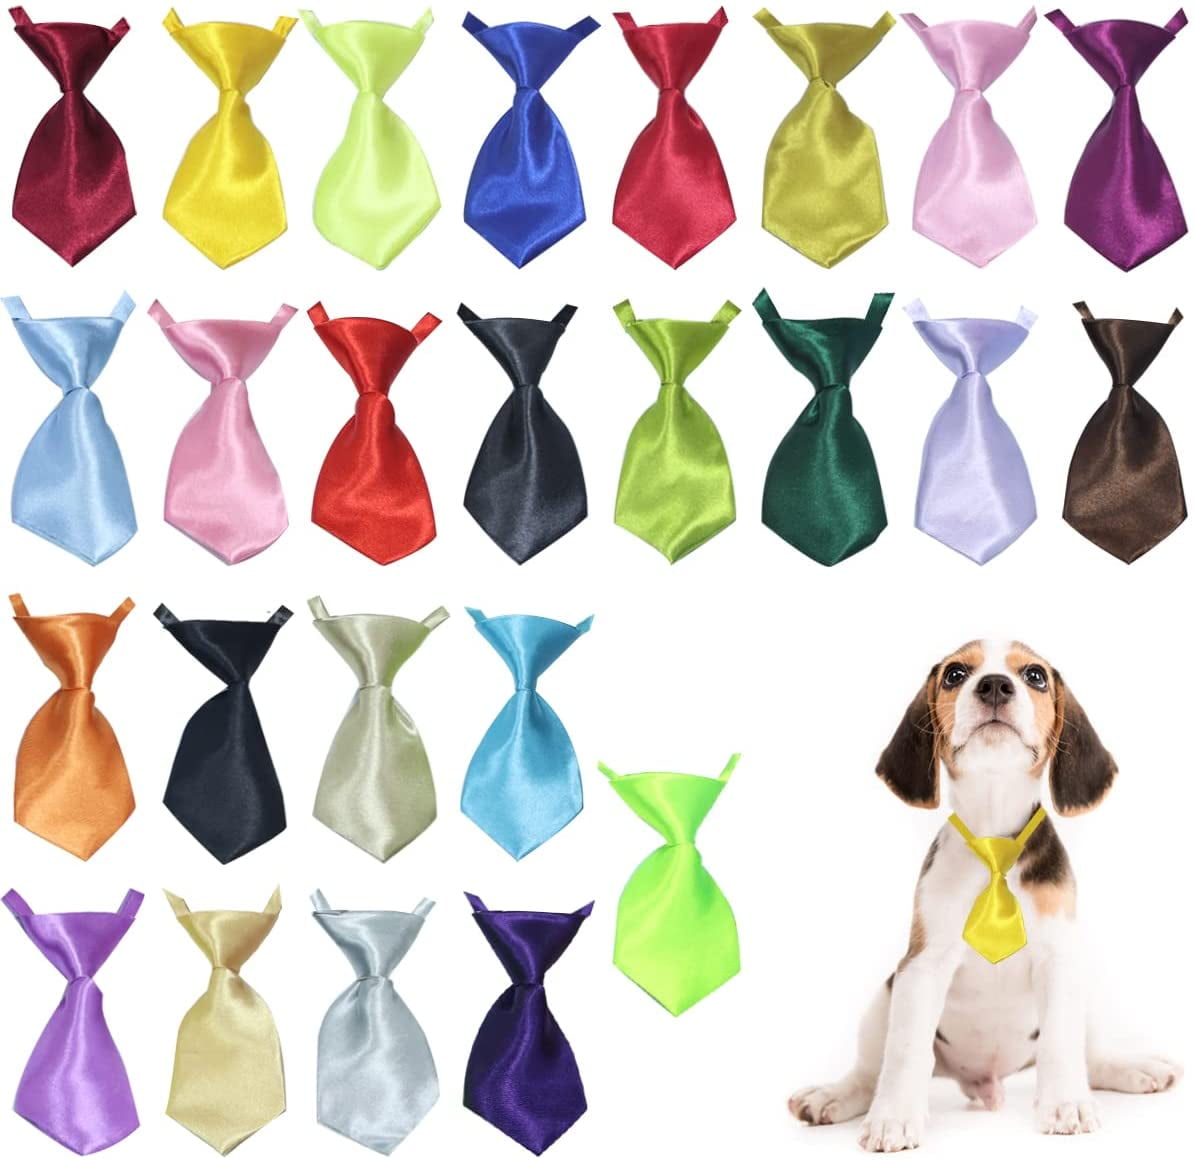 Yirtree 10pcs Small Neckties for Dogs, Dog Neck Bow Ties with ...